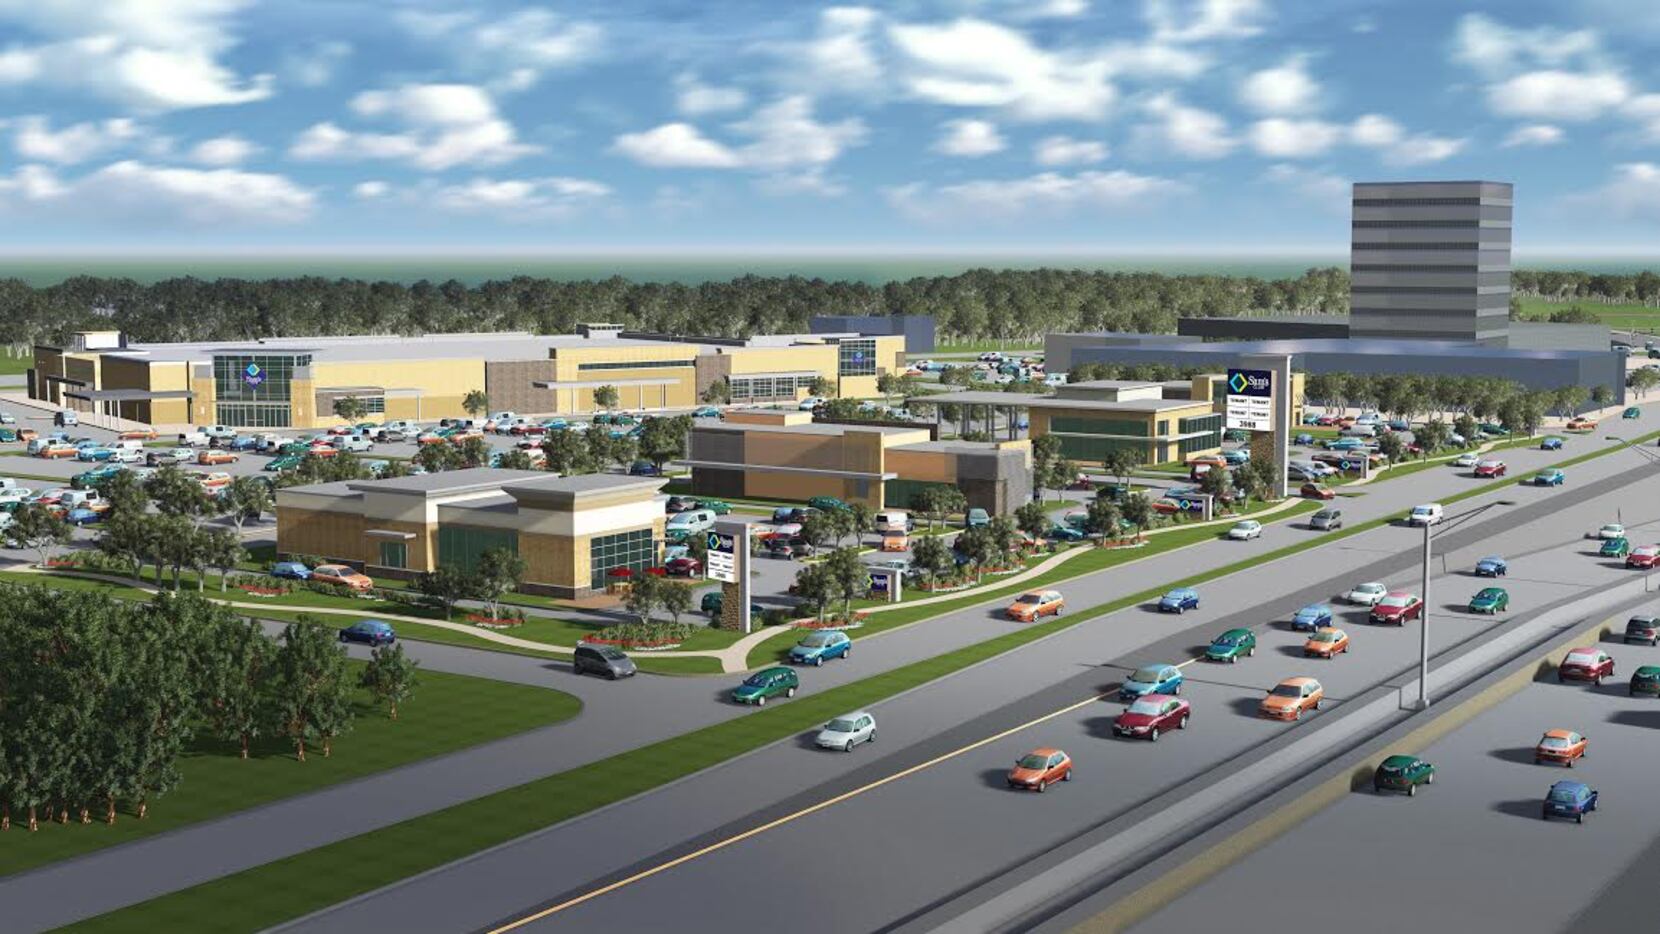 This is what Trammell Crow says the Sam's Club will look like in the shadow of Cityplace....